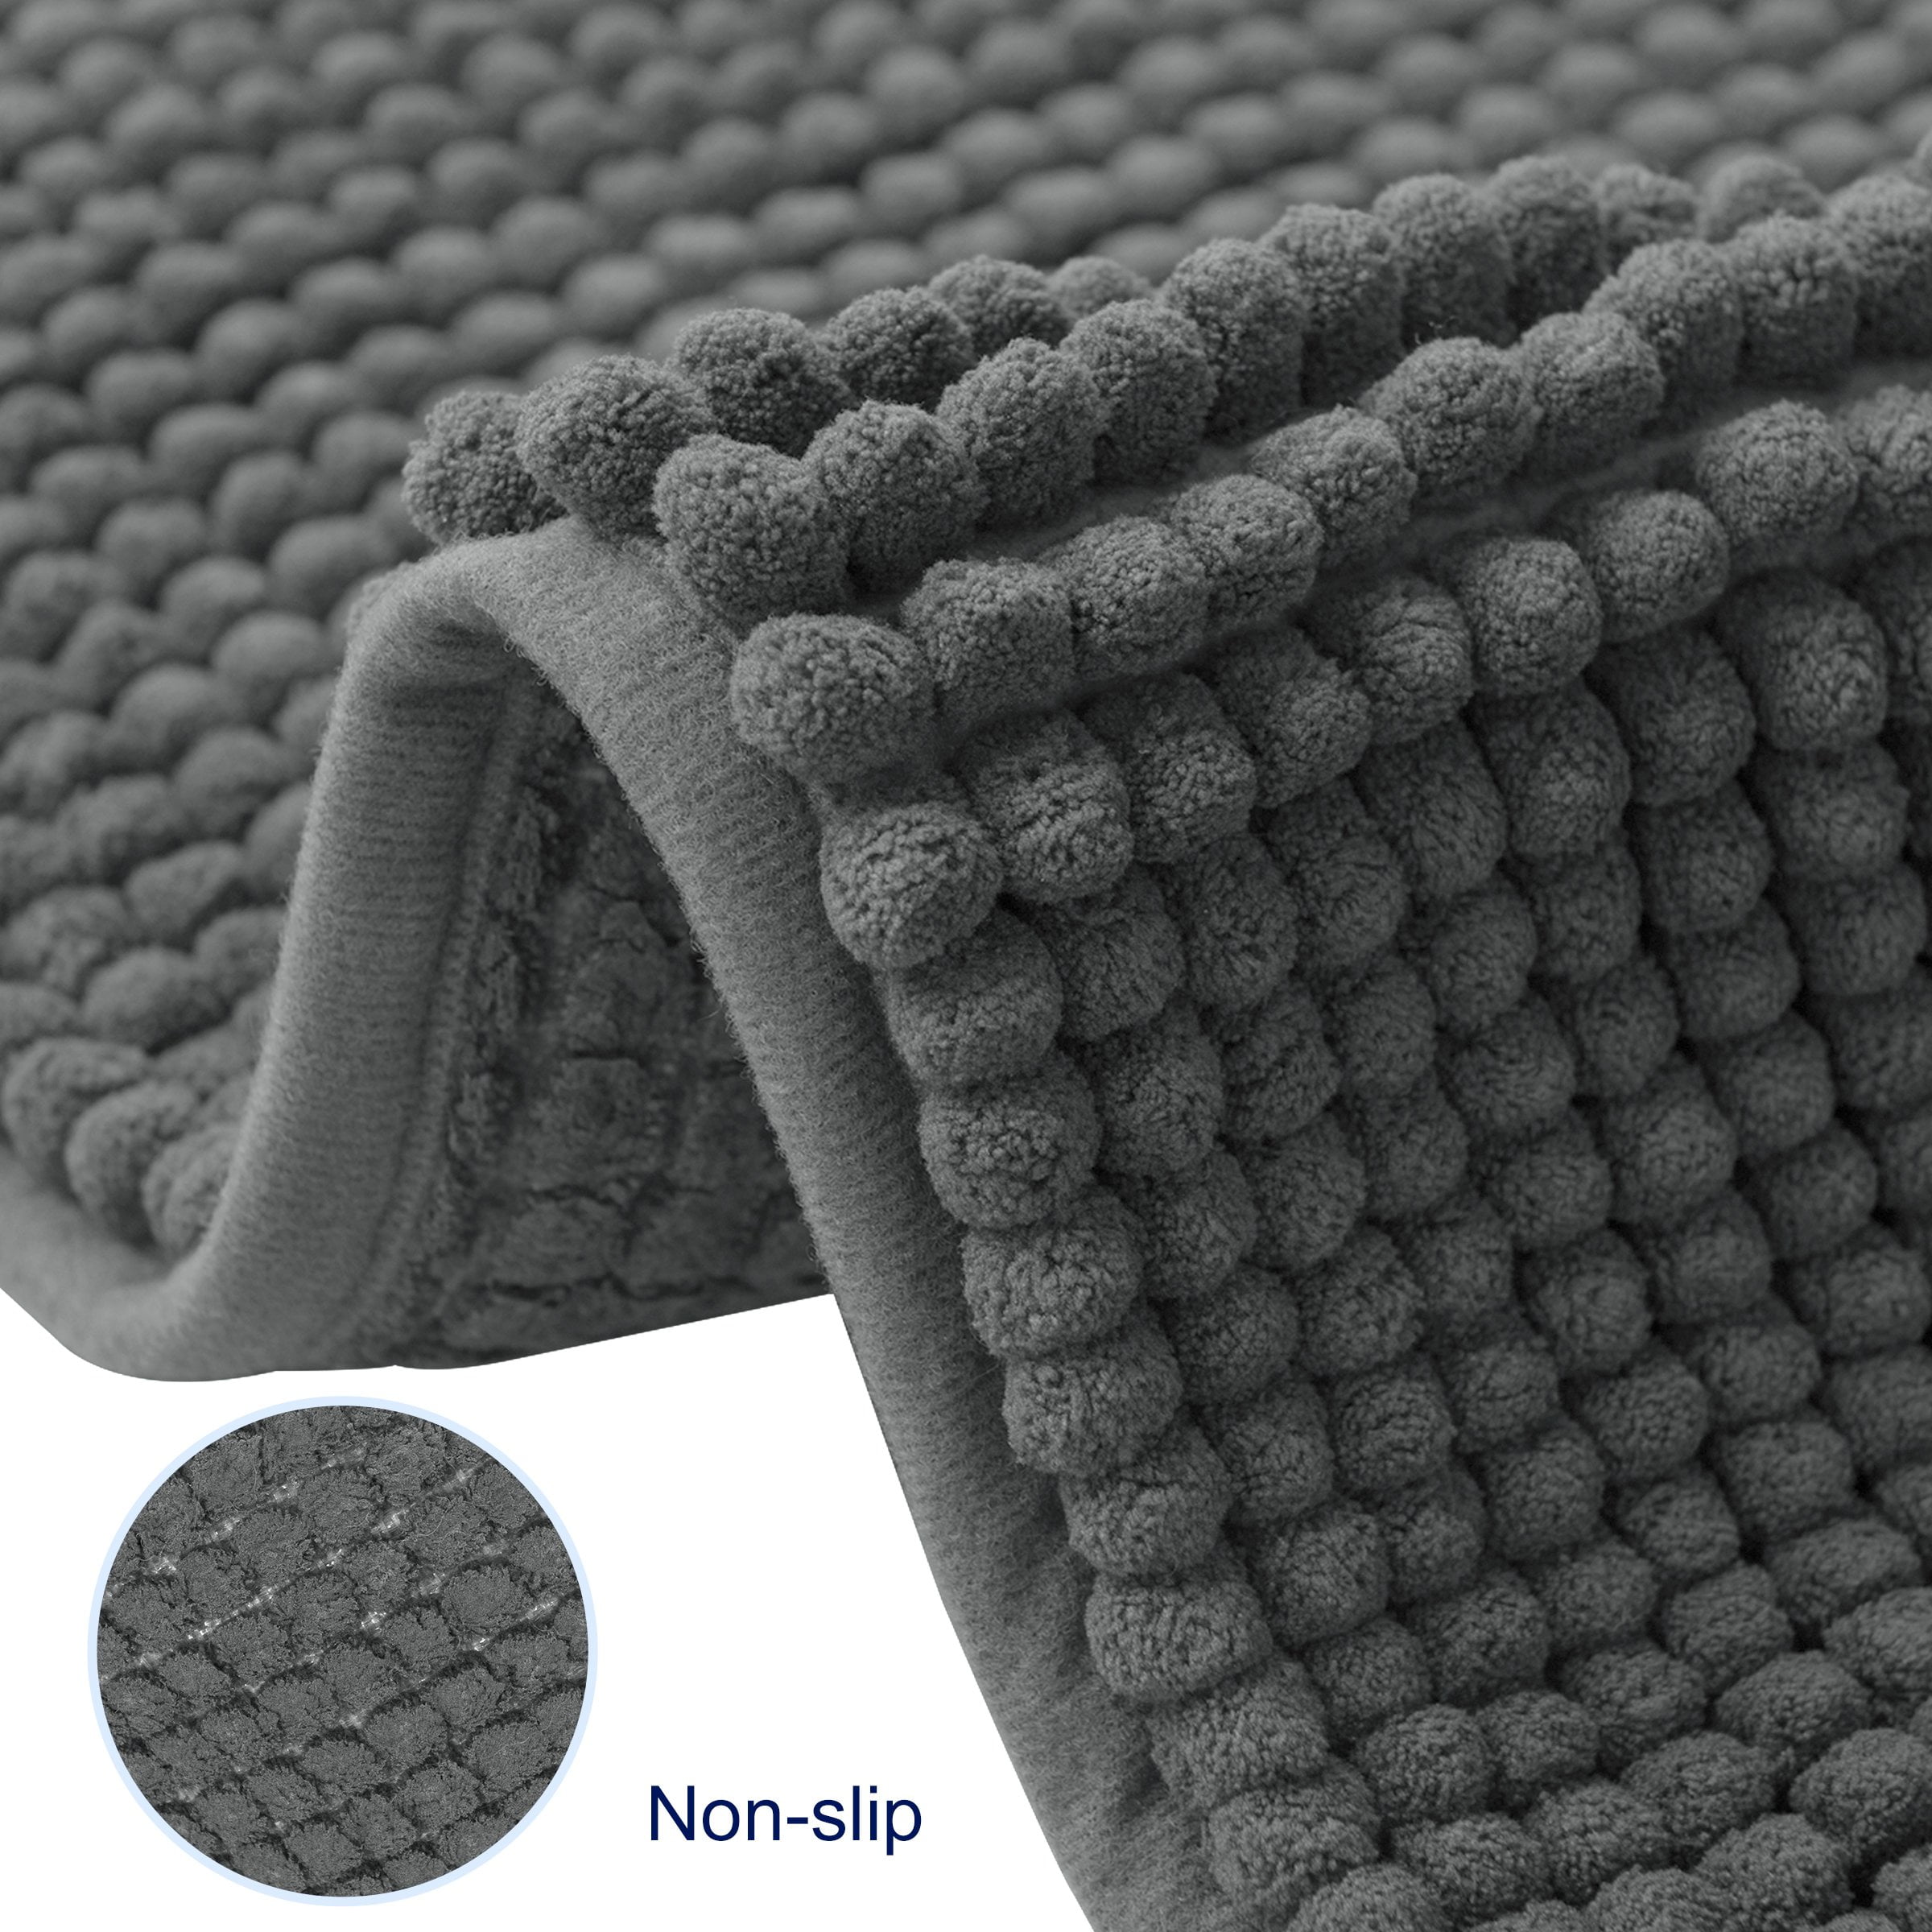 Gradient Cationic Chenille Water Absorbent Bath Rug Latitude Run Color: Black, Size: 16 W x 24 L